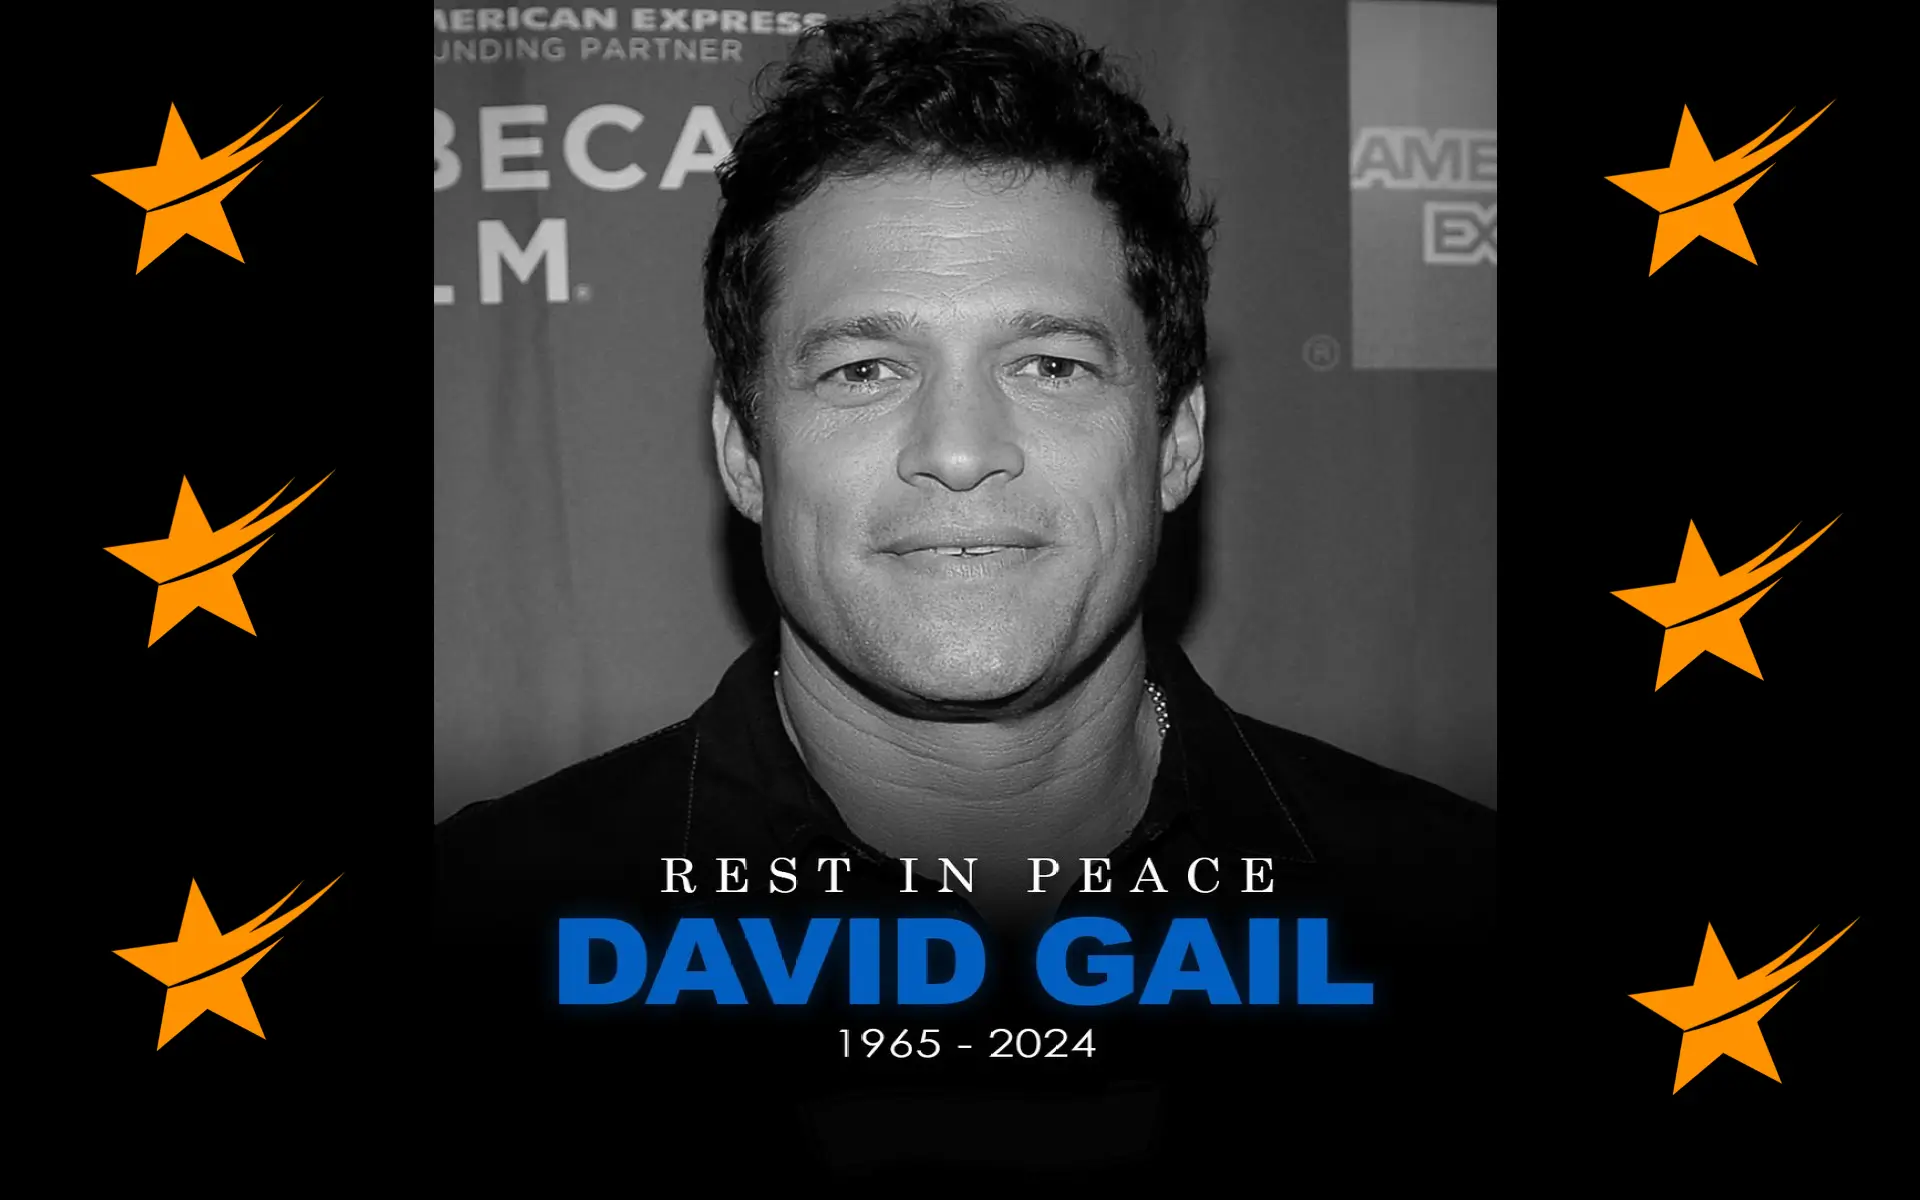 Remembering David Gail: A Tribute to the Beverly Hills 90210 Actor